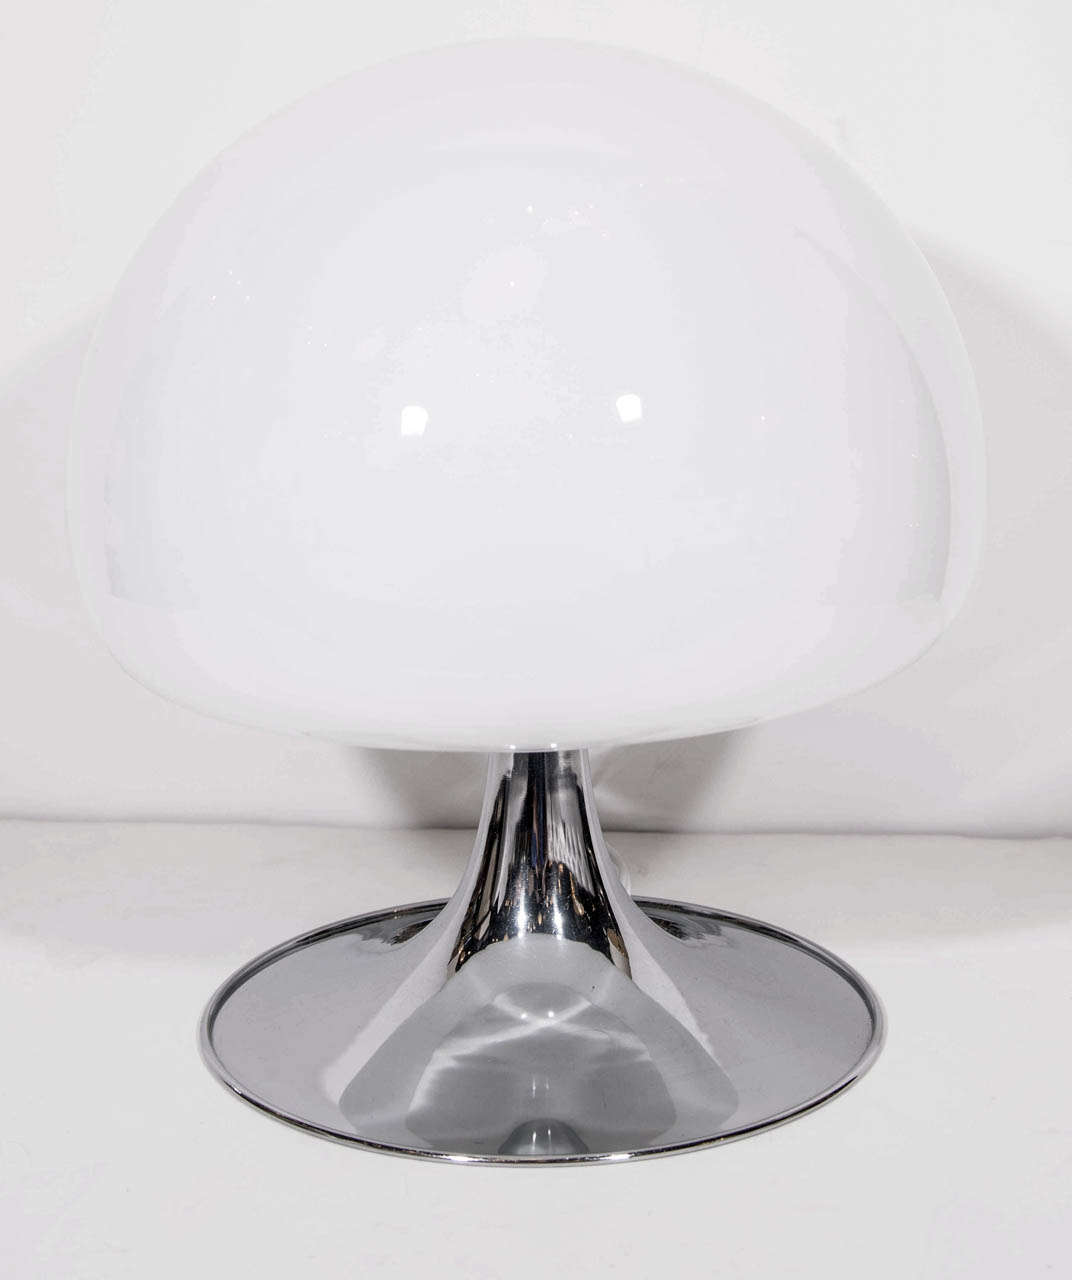 Pair of sculptural table lamps with opaline glass domes and stylized tulip bases in chrome. The lamps have a spectacular  design with a modern mushroom form. Signed/Stamped Reggiani. Newly rewired and fitted with on/off switch on cord wires.